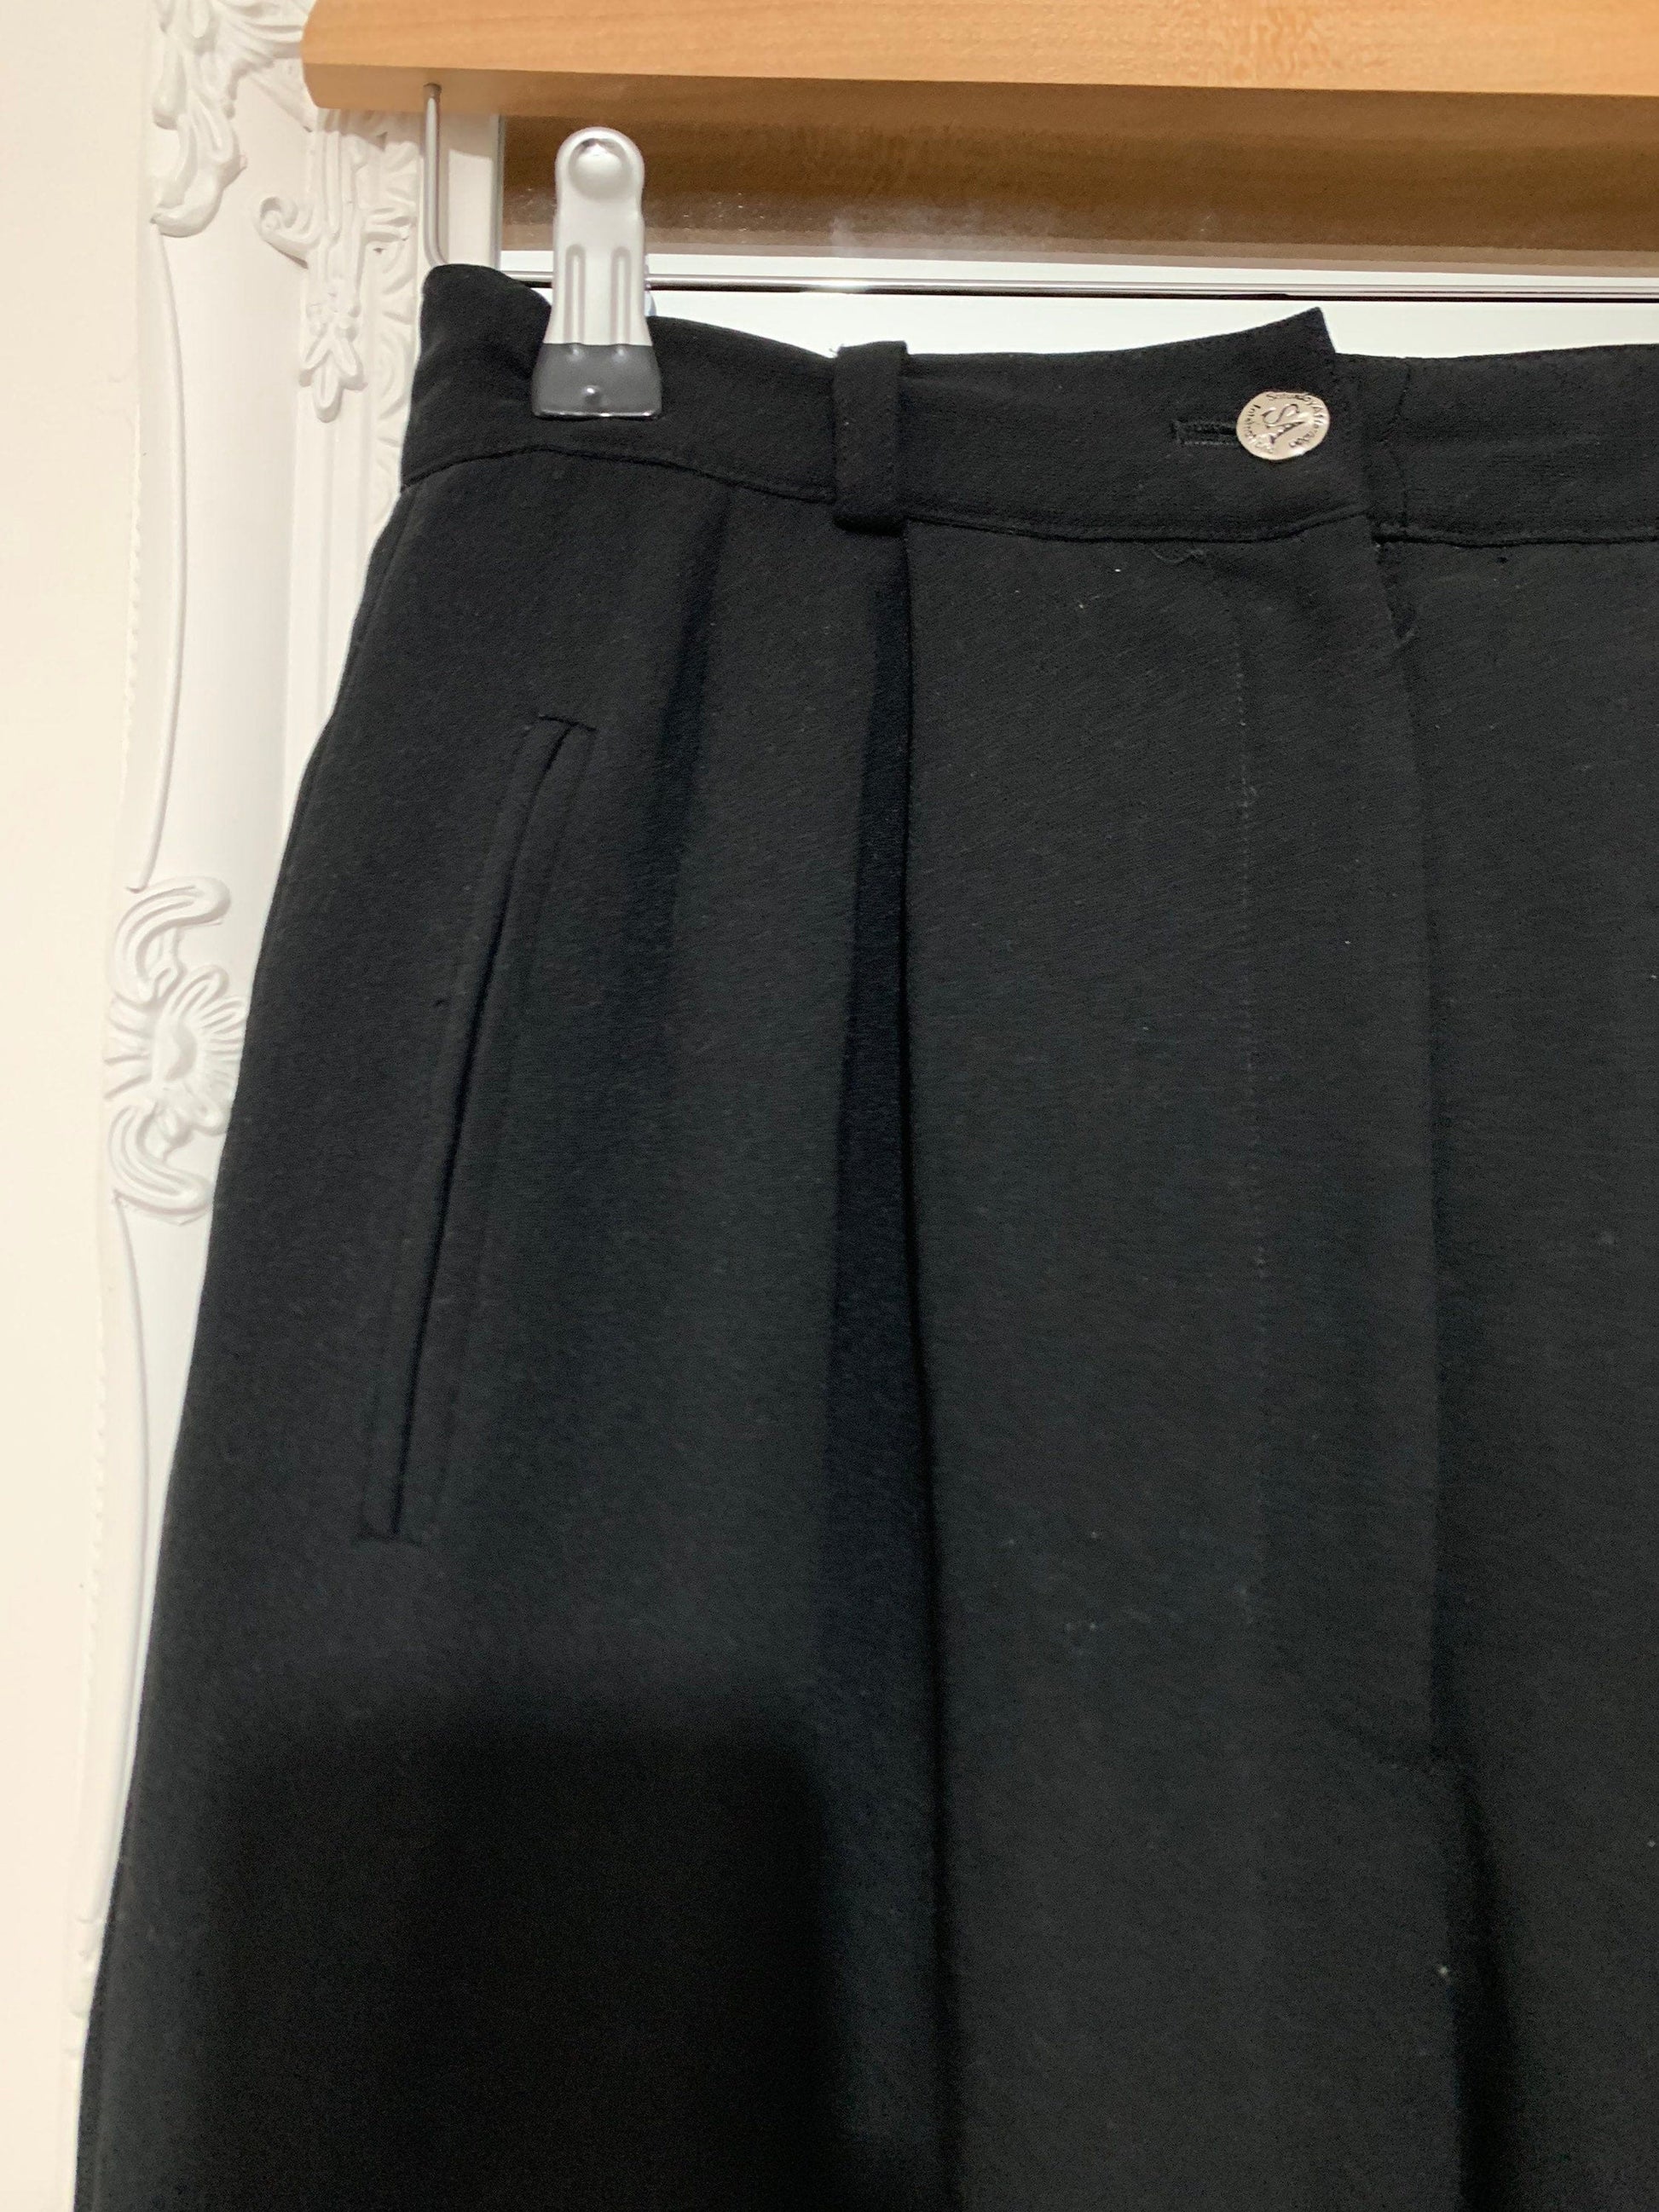 Vintage black trousers High waisted ladies pleated trousers black - with belt loops 80s baggy trousers mom trousers black trouser